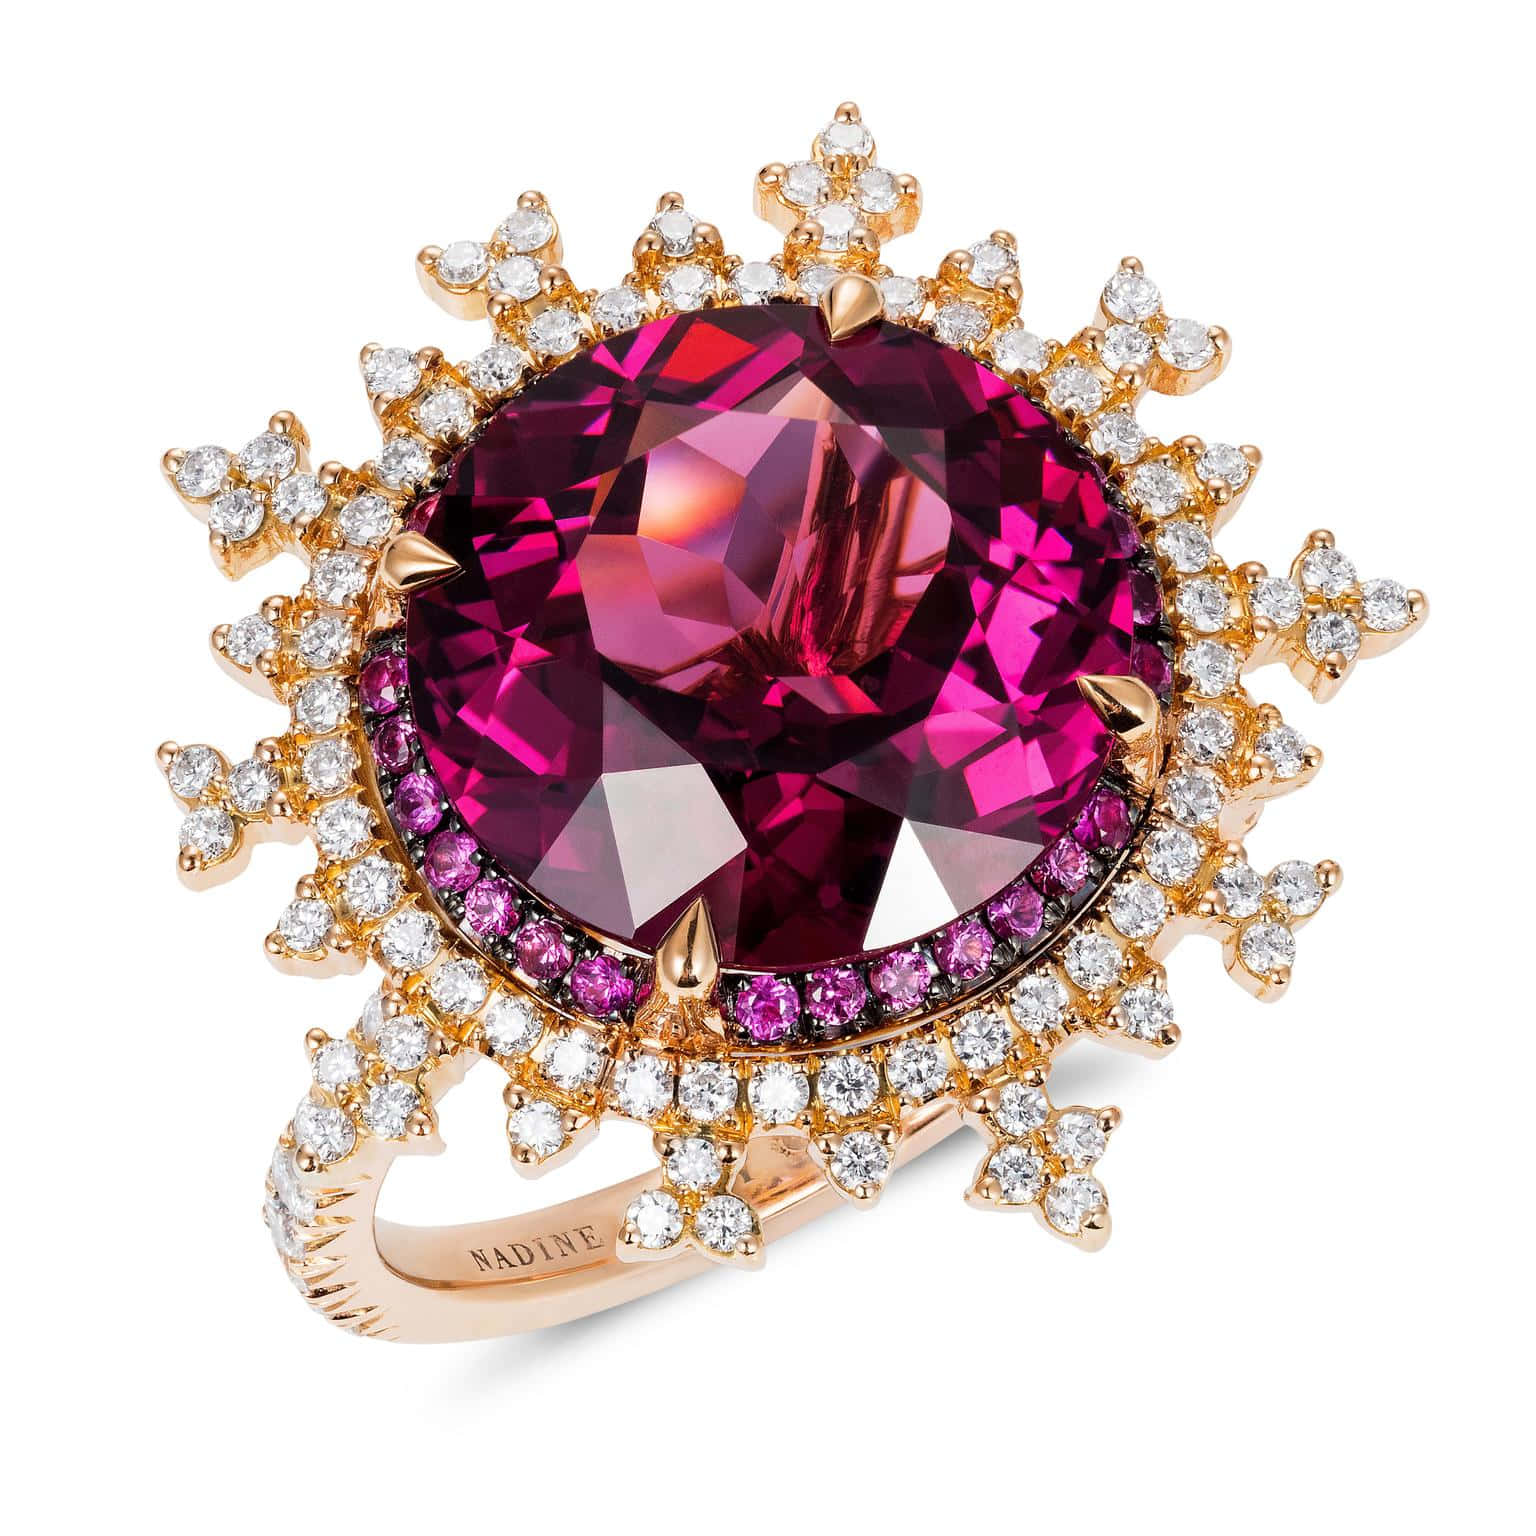 A Ring With A Pink And Purple Stone